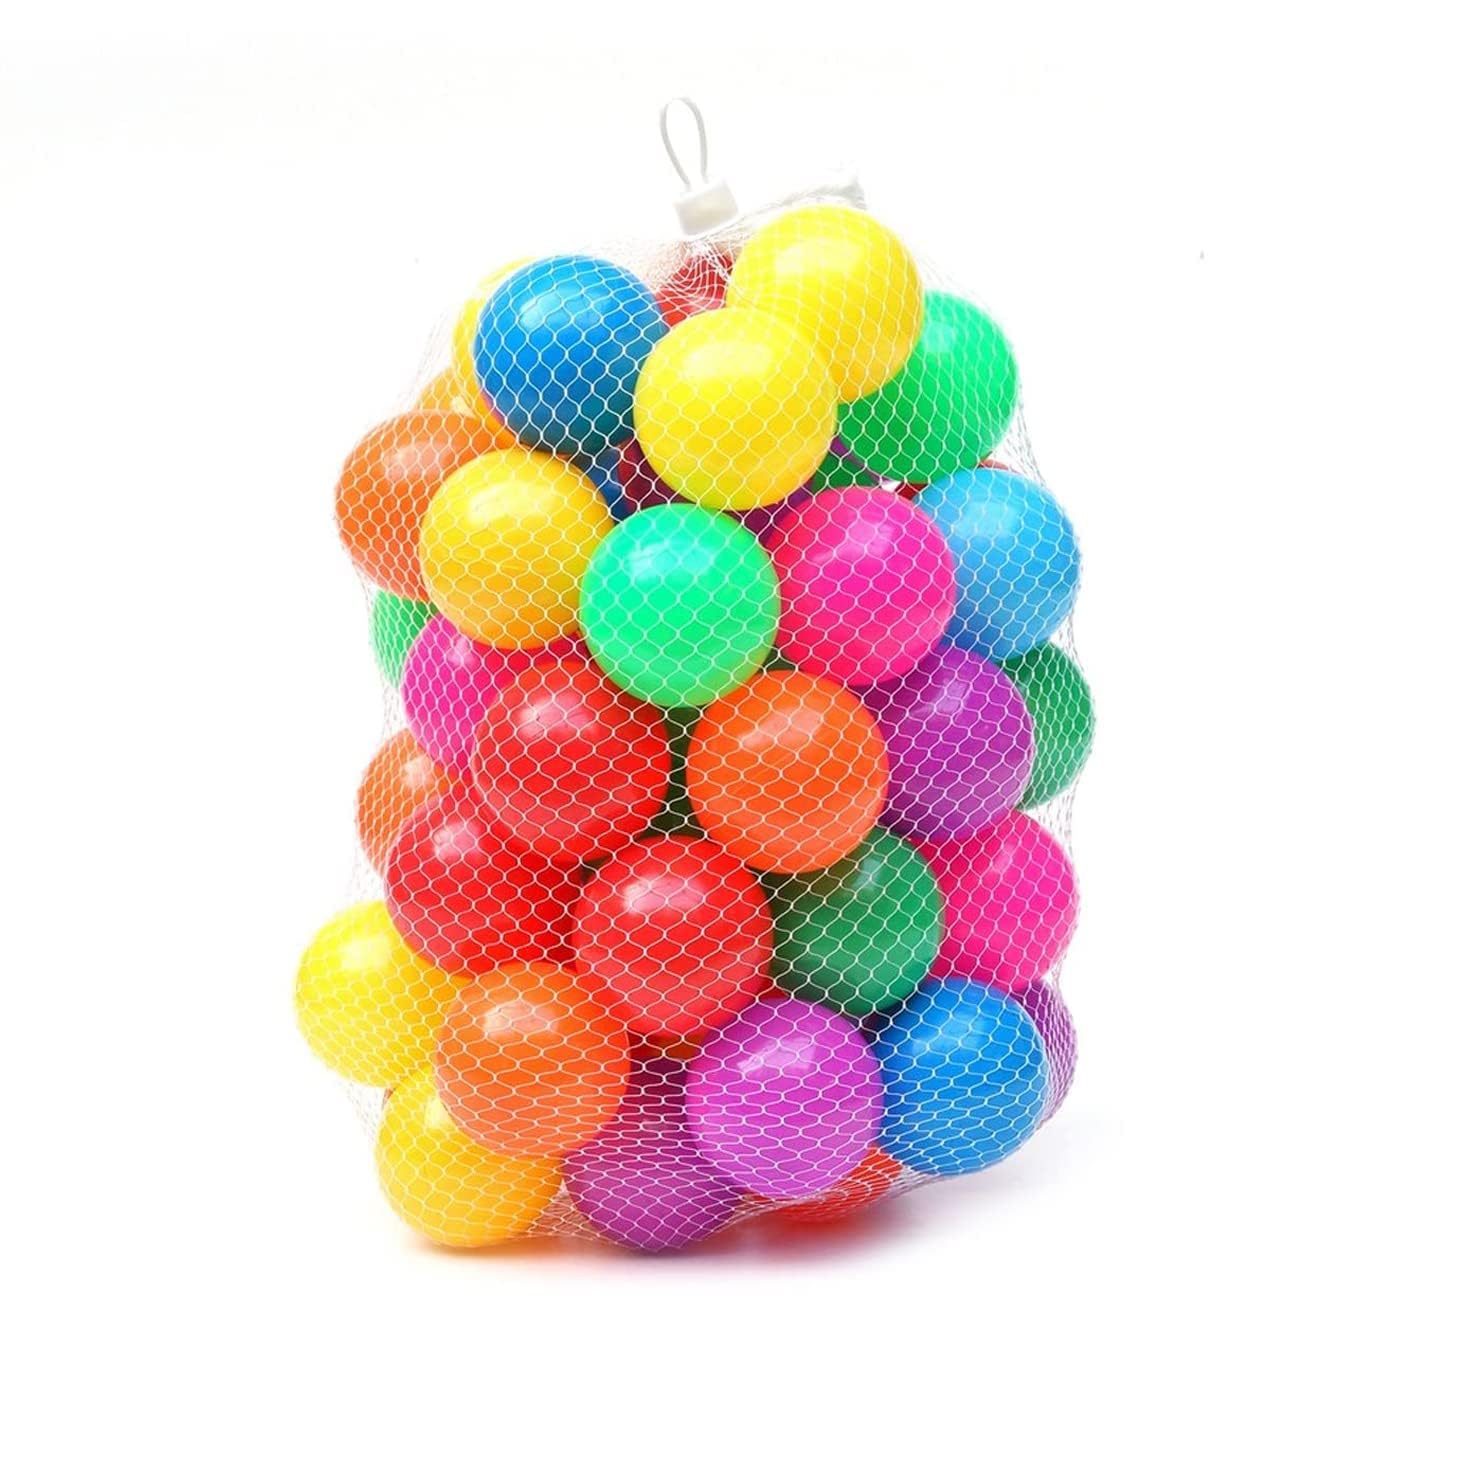 BAYBEE Soft Plastic Baby Pit Balls for Kids Reusable Soft Crush Proof Play Pit Balls - (50 Pcs)